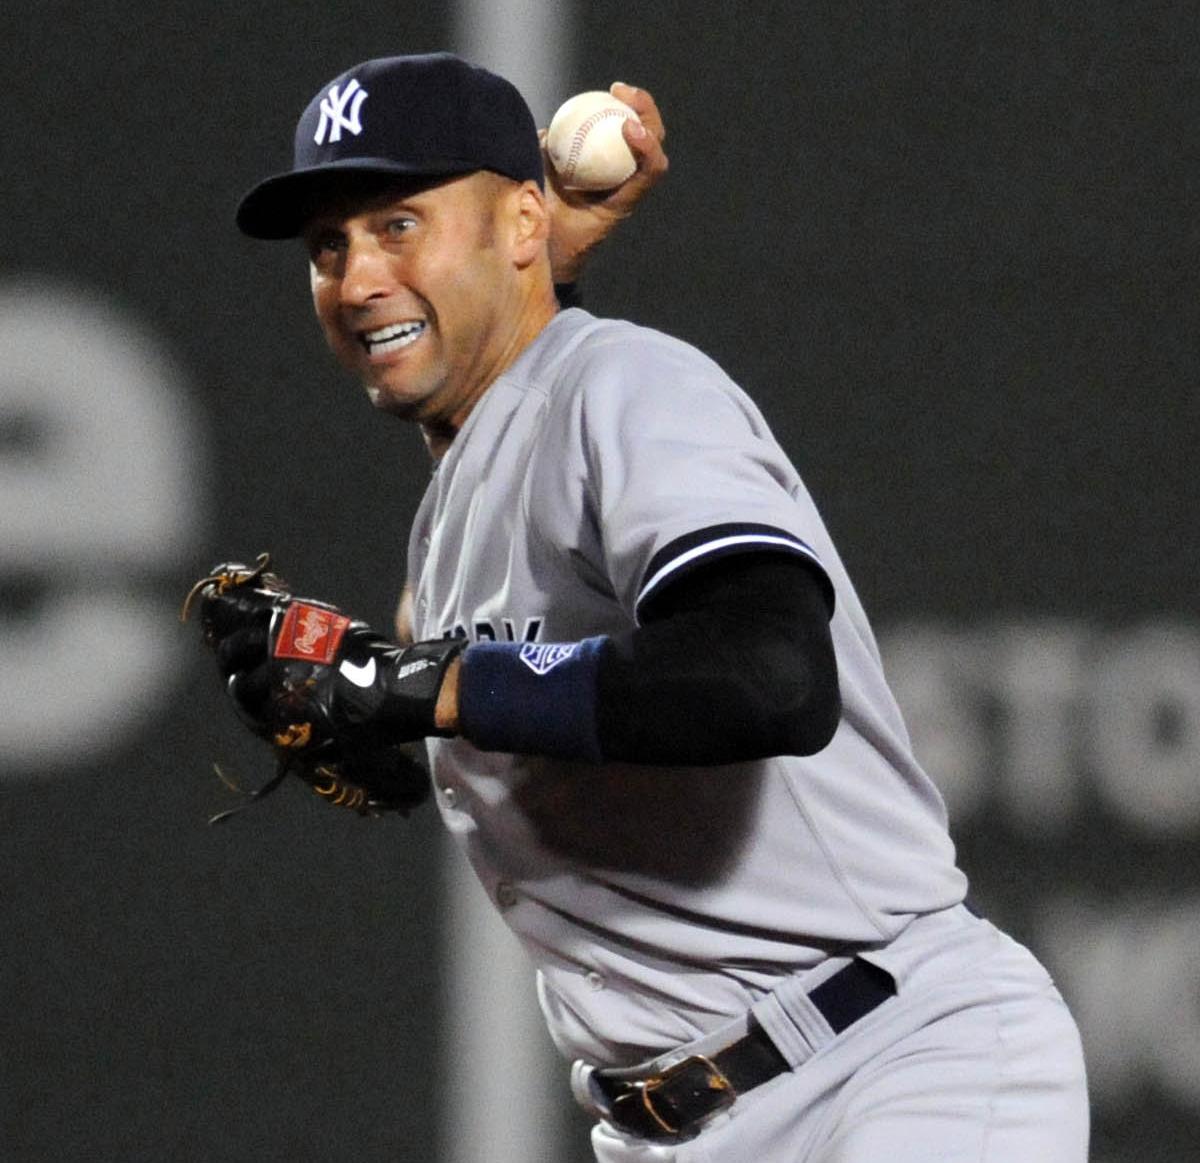 Derek Jeter Proves the Fallacy of Range Factor as a Measure of Defense ...